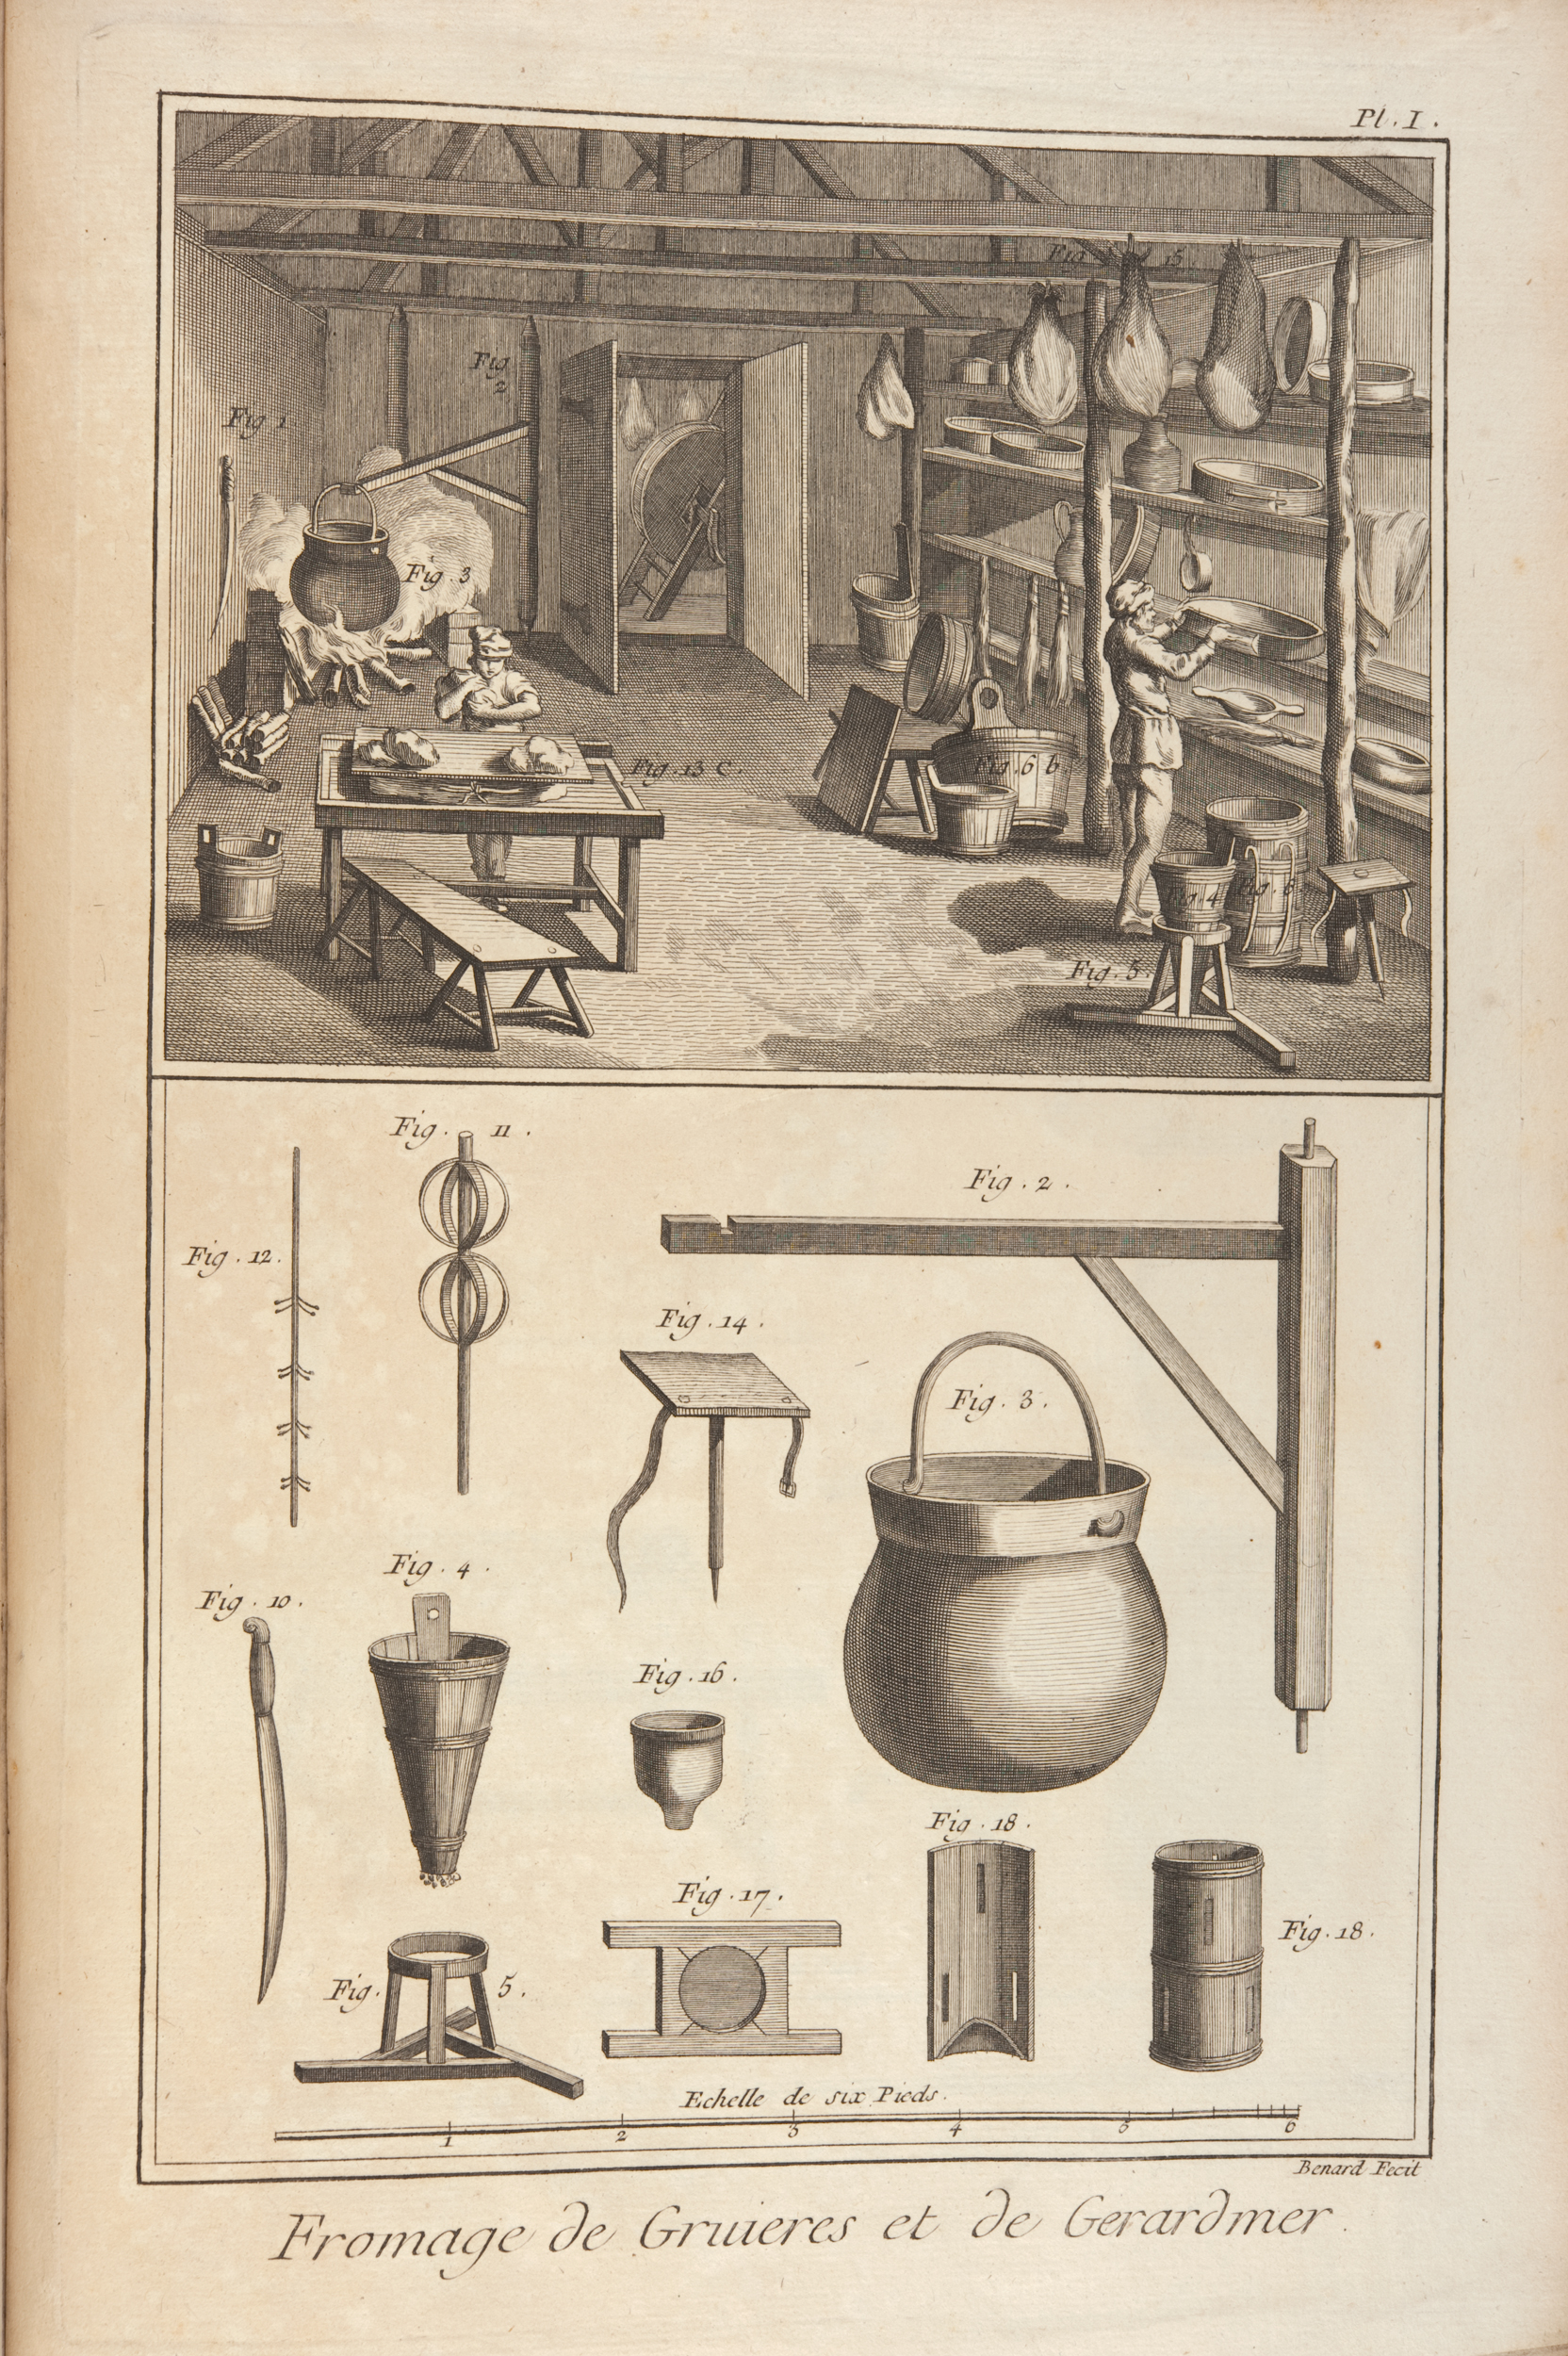 Plate depicting "Fromage de Gruieres et de Gerardmer" (cheese making) from Diderot & d’Alembert’s Encyclopédie (St Andrews copy at =sf AE25.D5)